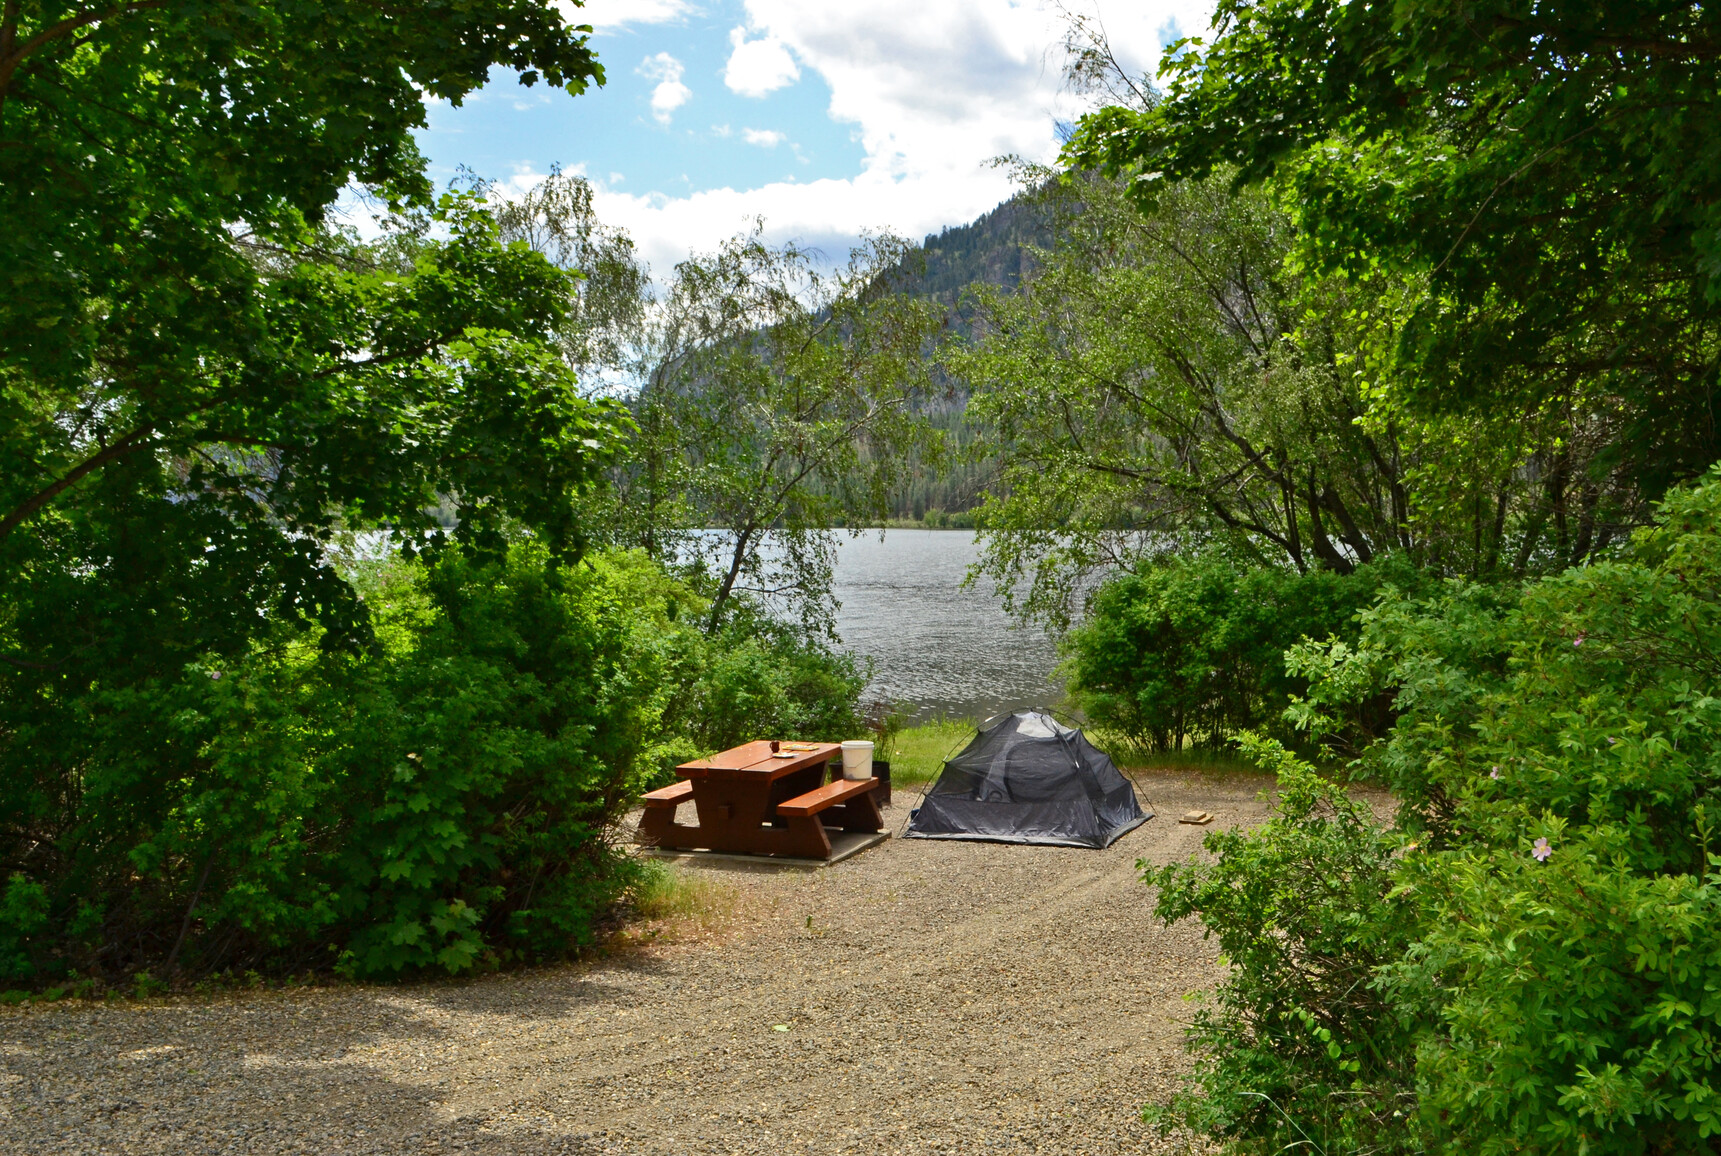 Photo of a campsite with a view of Vaseux Lake. There is a picnic table, firepit, and tent set up in the campsite. Shrubs and forest surround the campsite. Forested mountains across the lake.